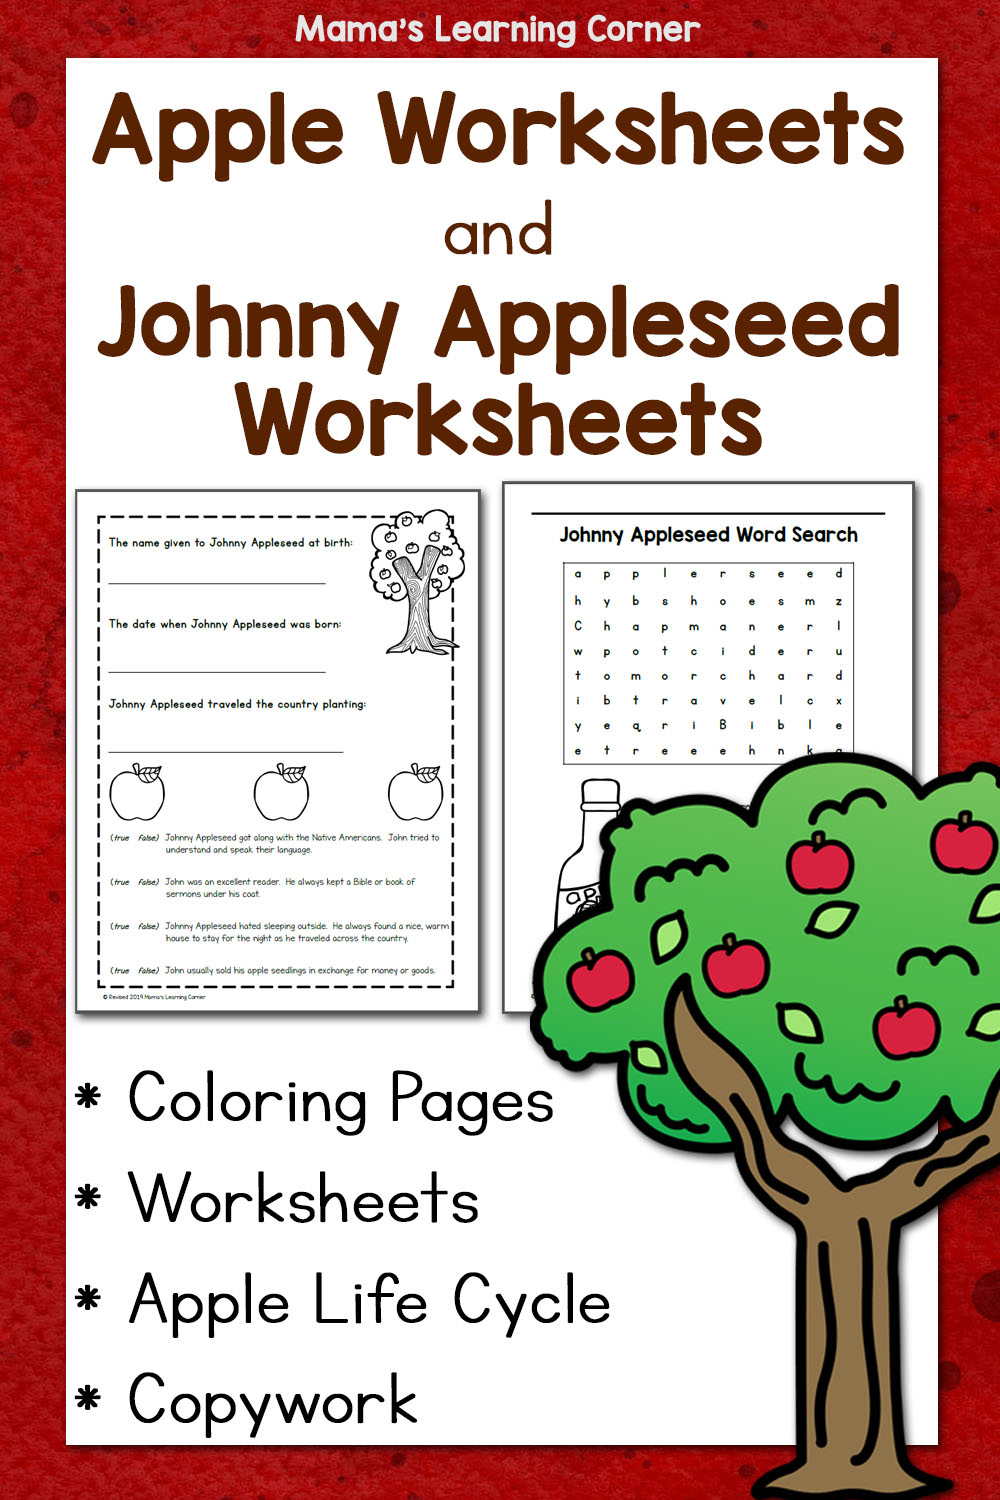 Apple Worksheets And Johnny Appleseed Worksheets Mamas Learning Corner